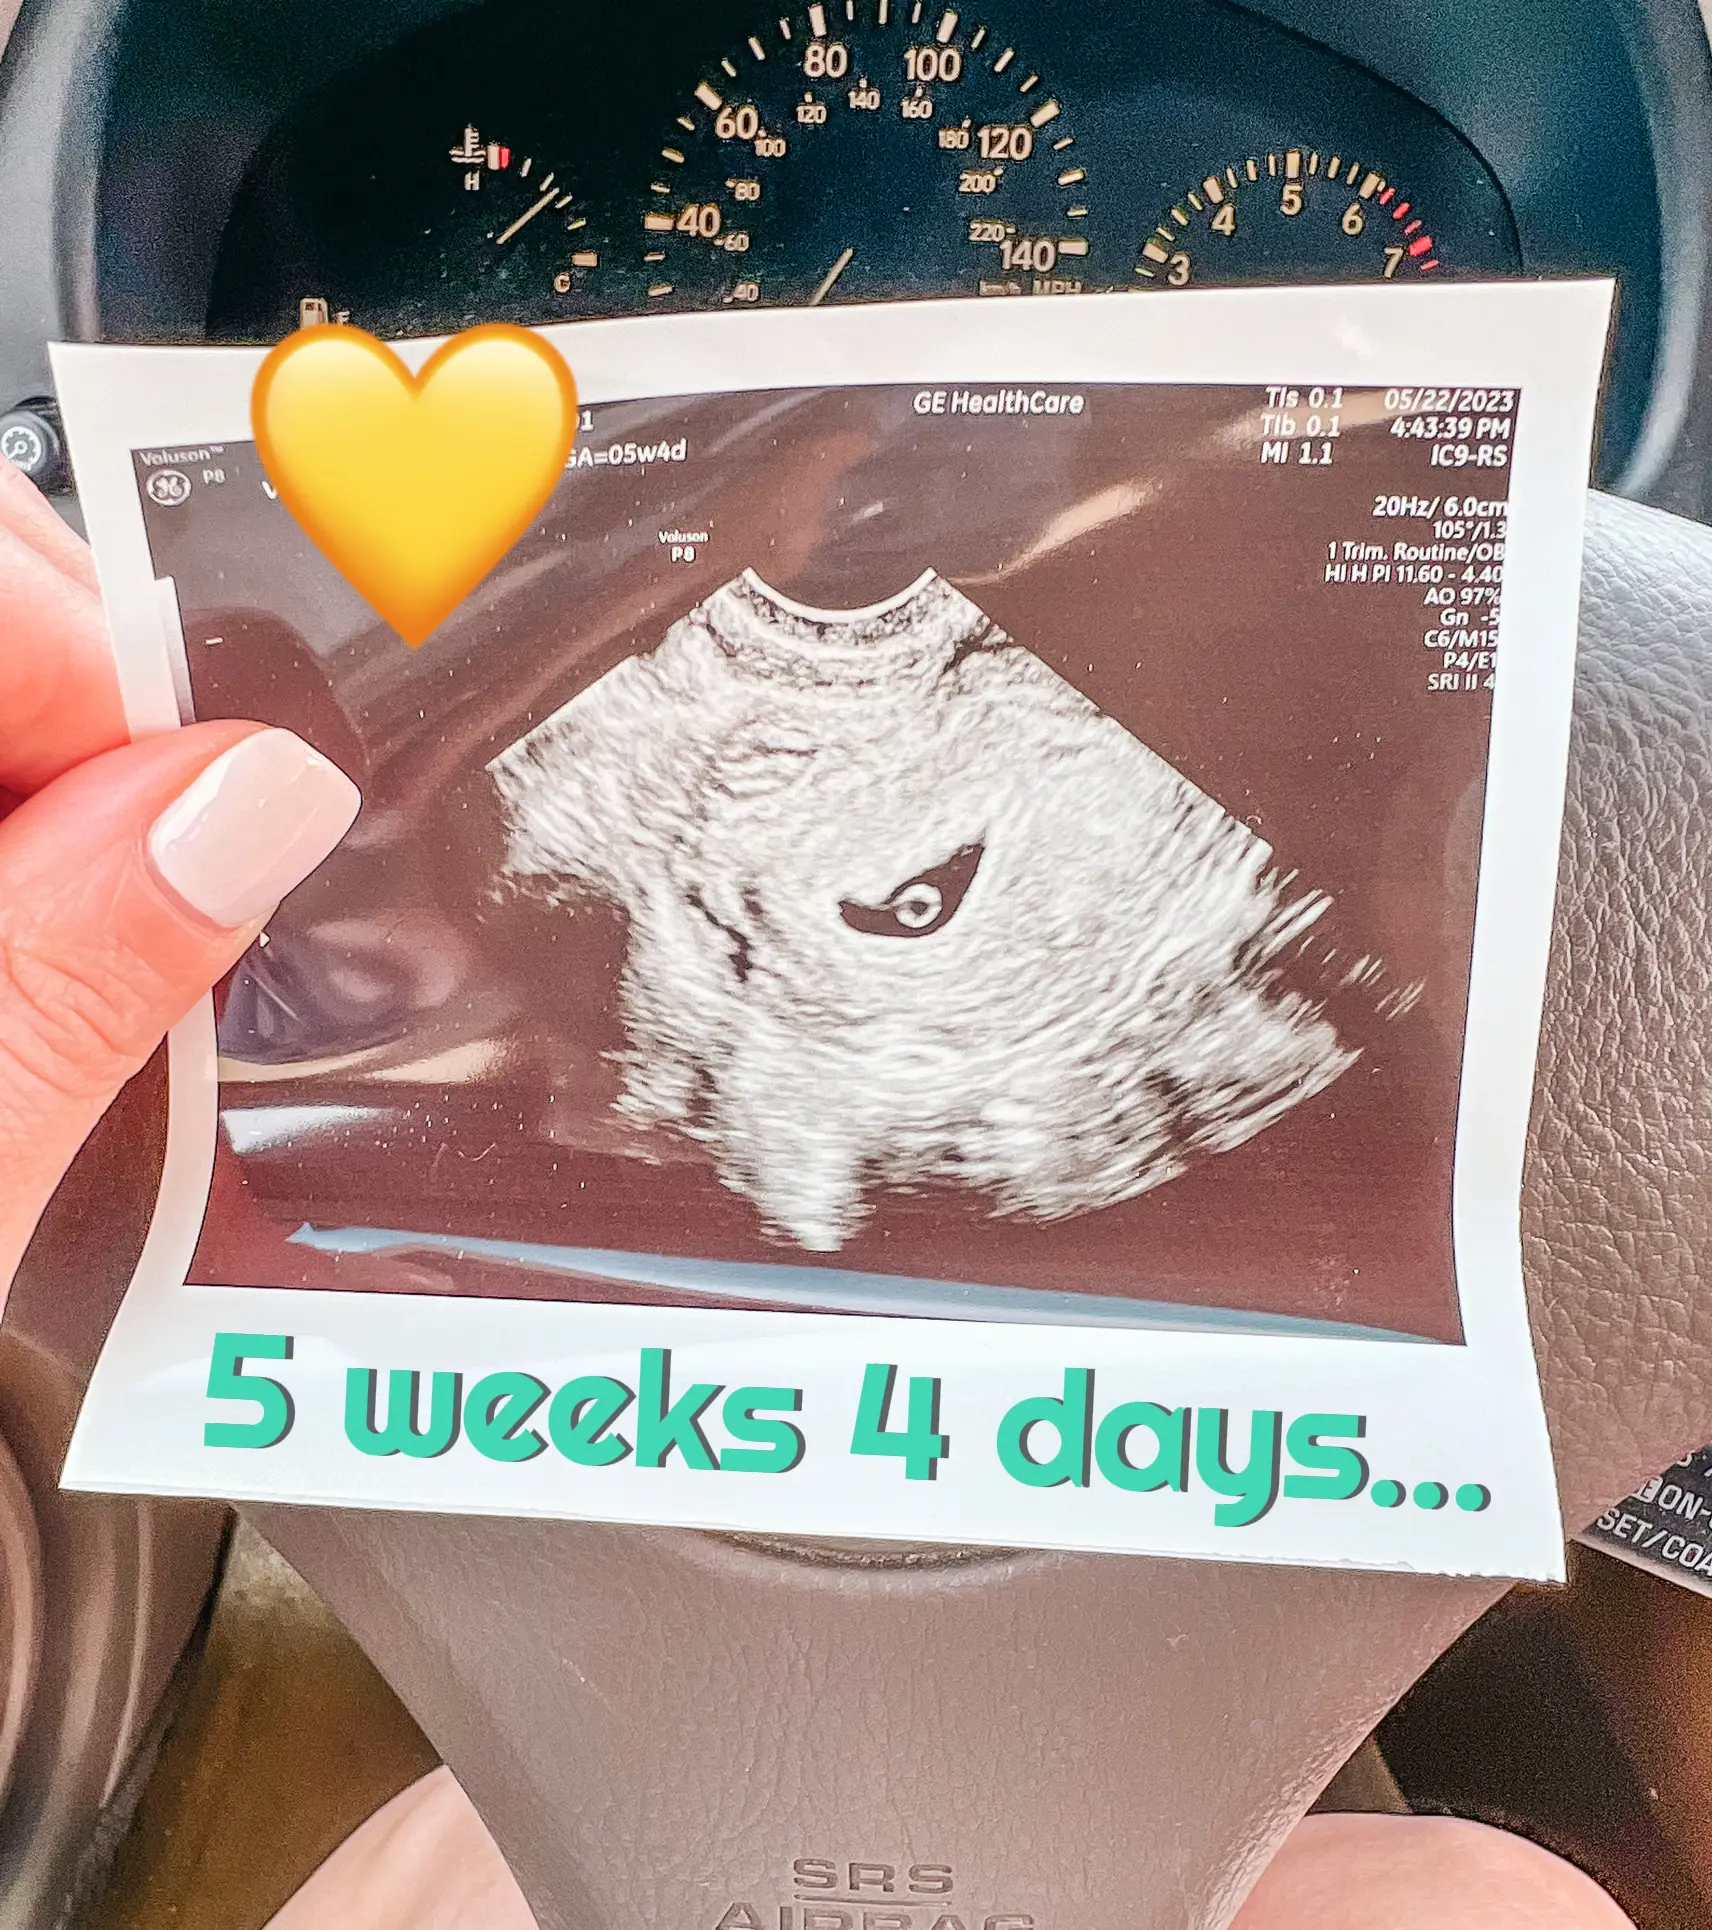 7w5d Brown Discharge? Tmi pic - May 2019 Babies, Forums